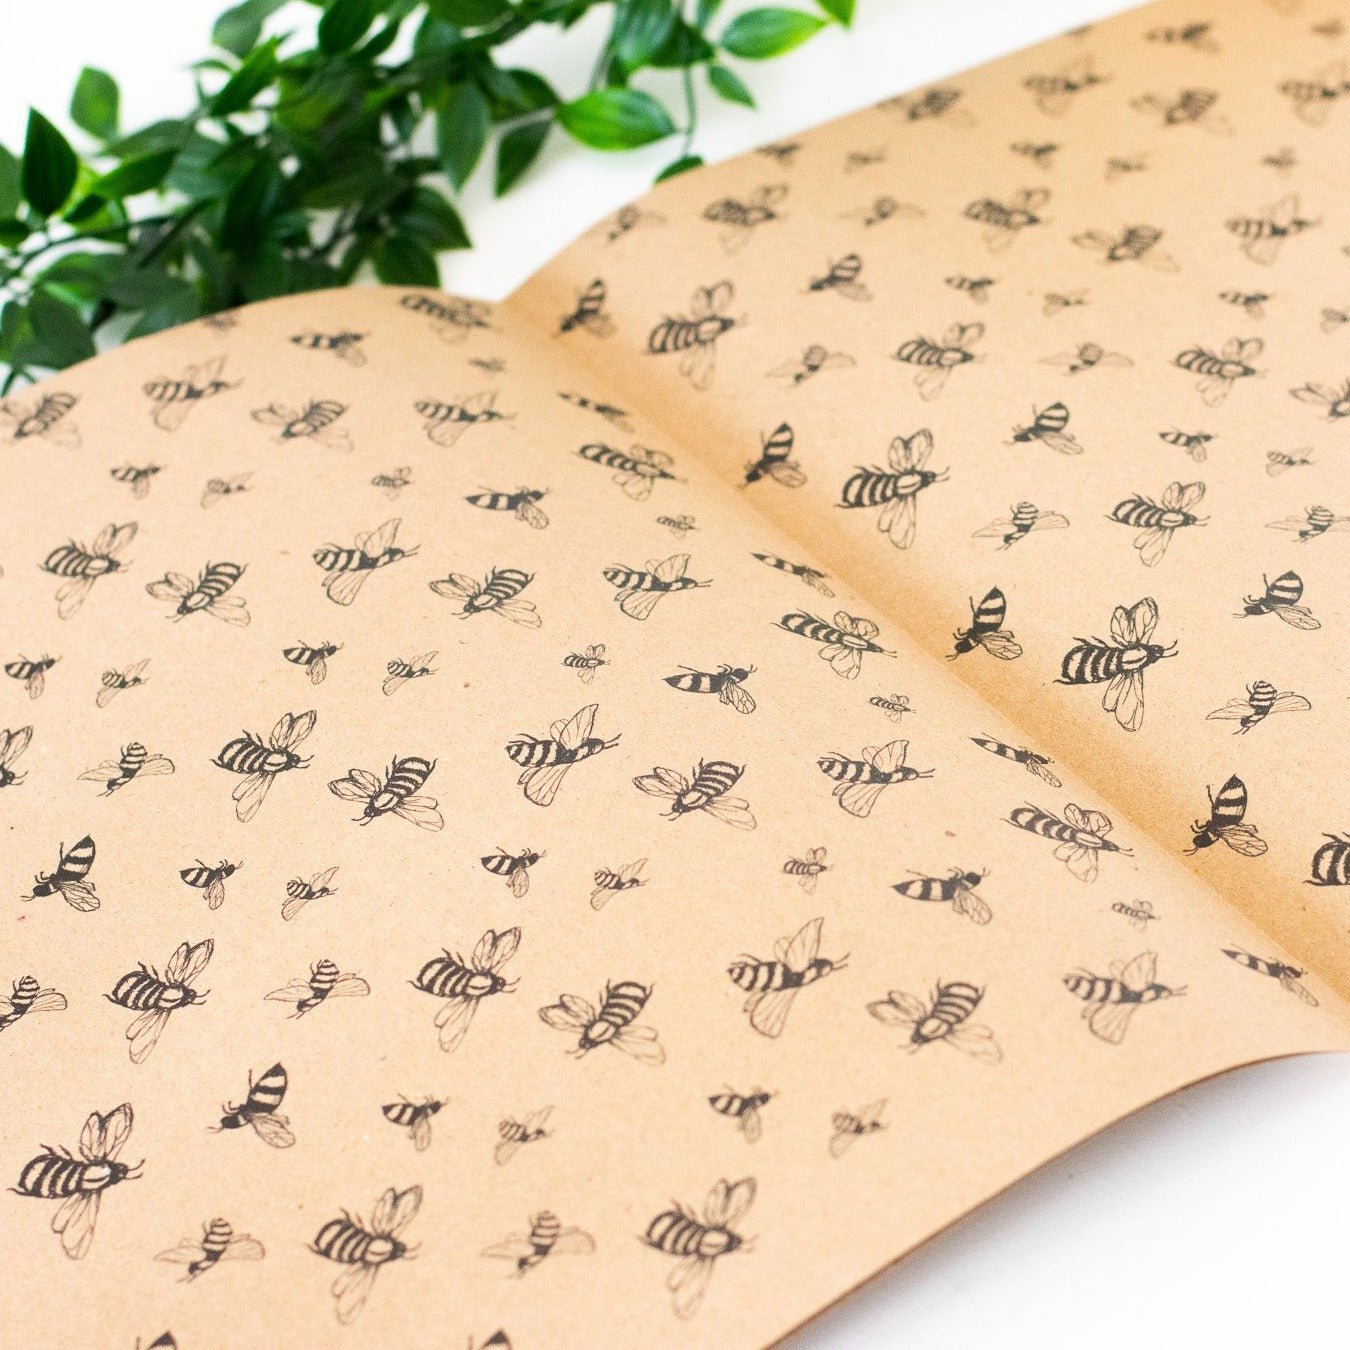 Eco Wrapping Paper With Bee Design